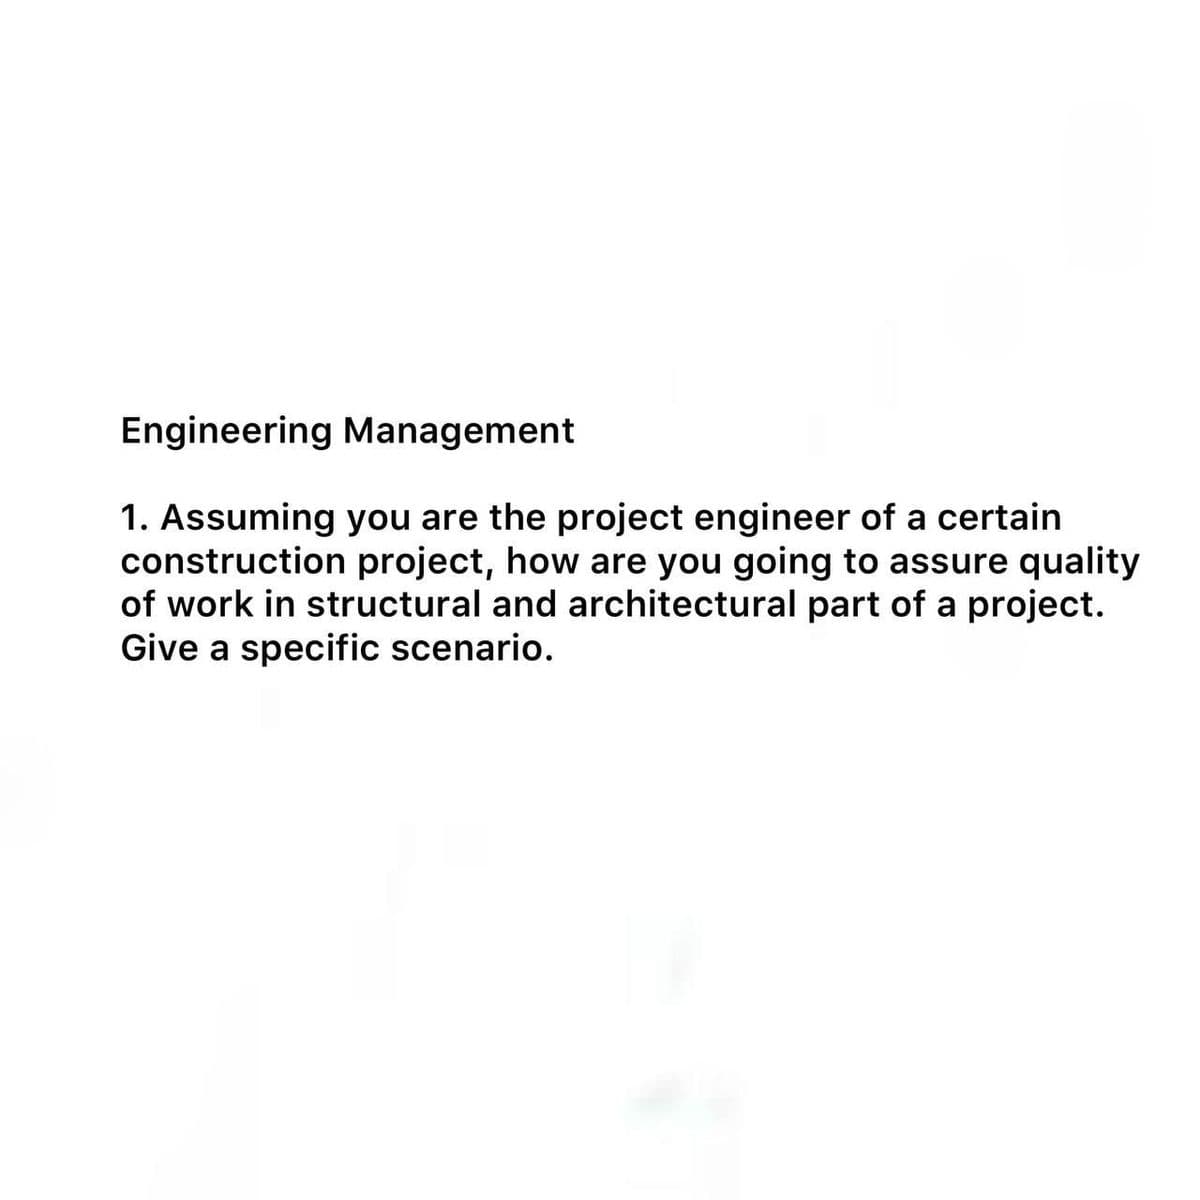 Engineering Management
1. Assuming you are the project engineer of a certain
construction project, how are you going to assure quality
of work in structural and architectural part of a project.
Give a specific scenario.